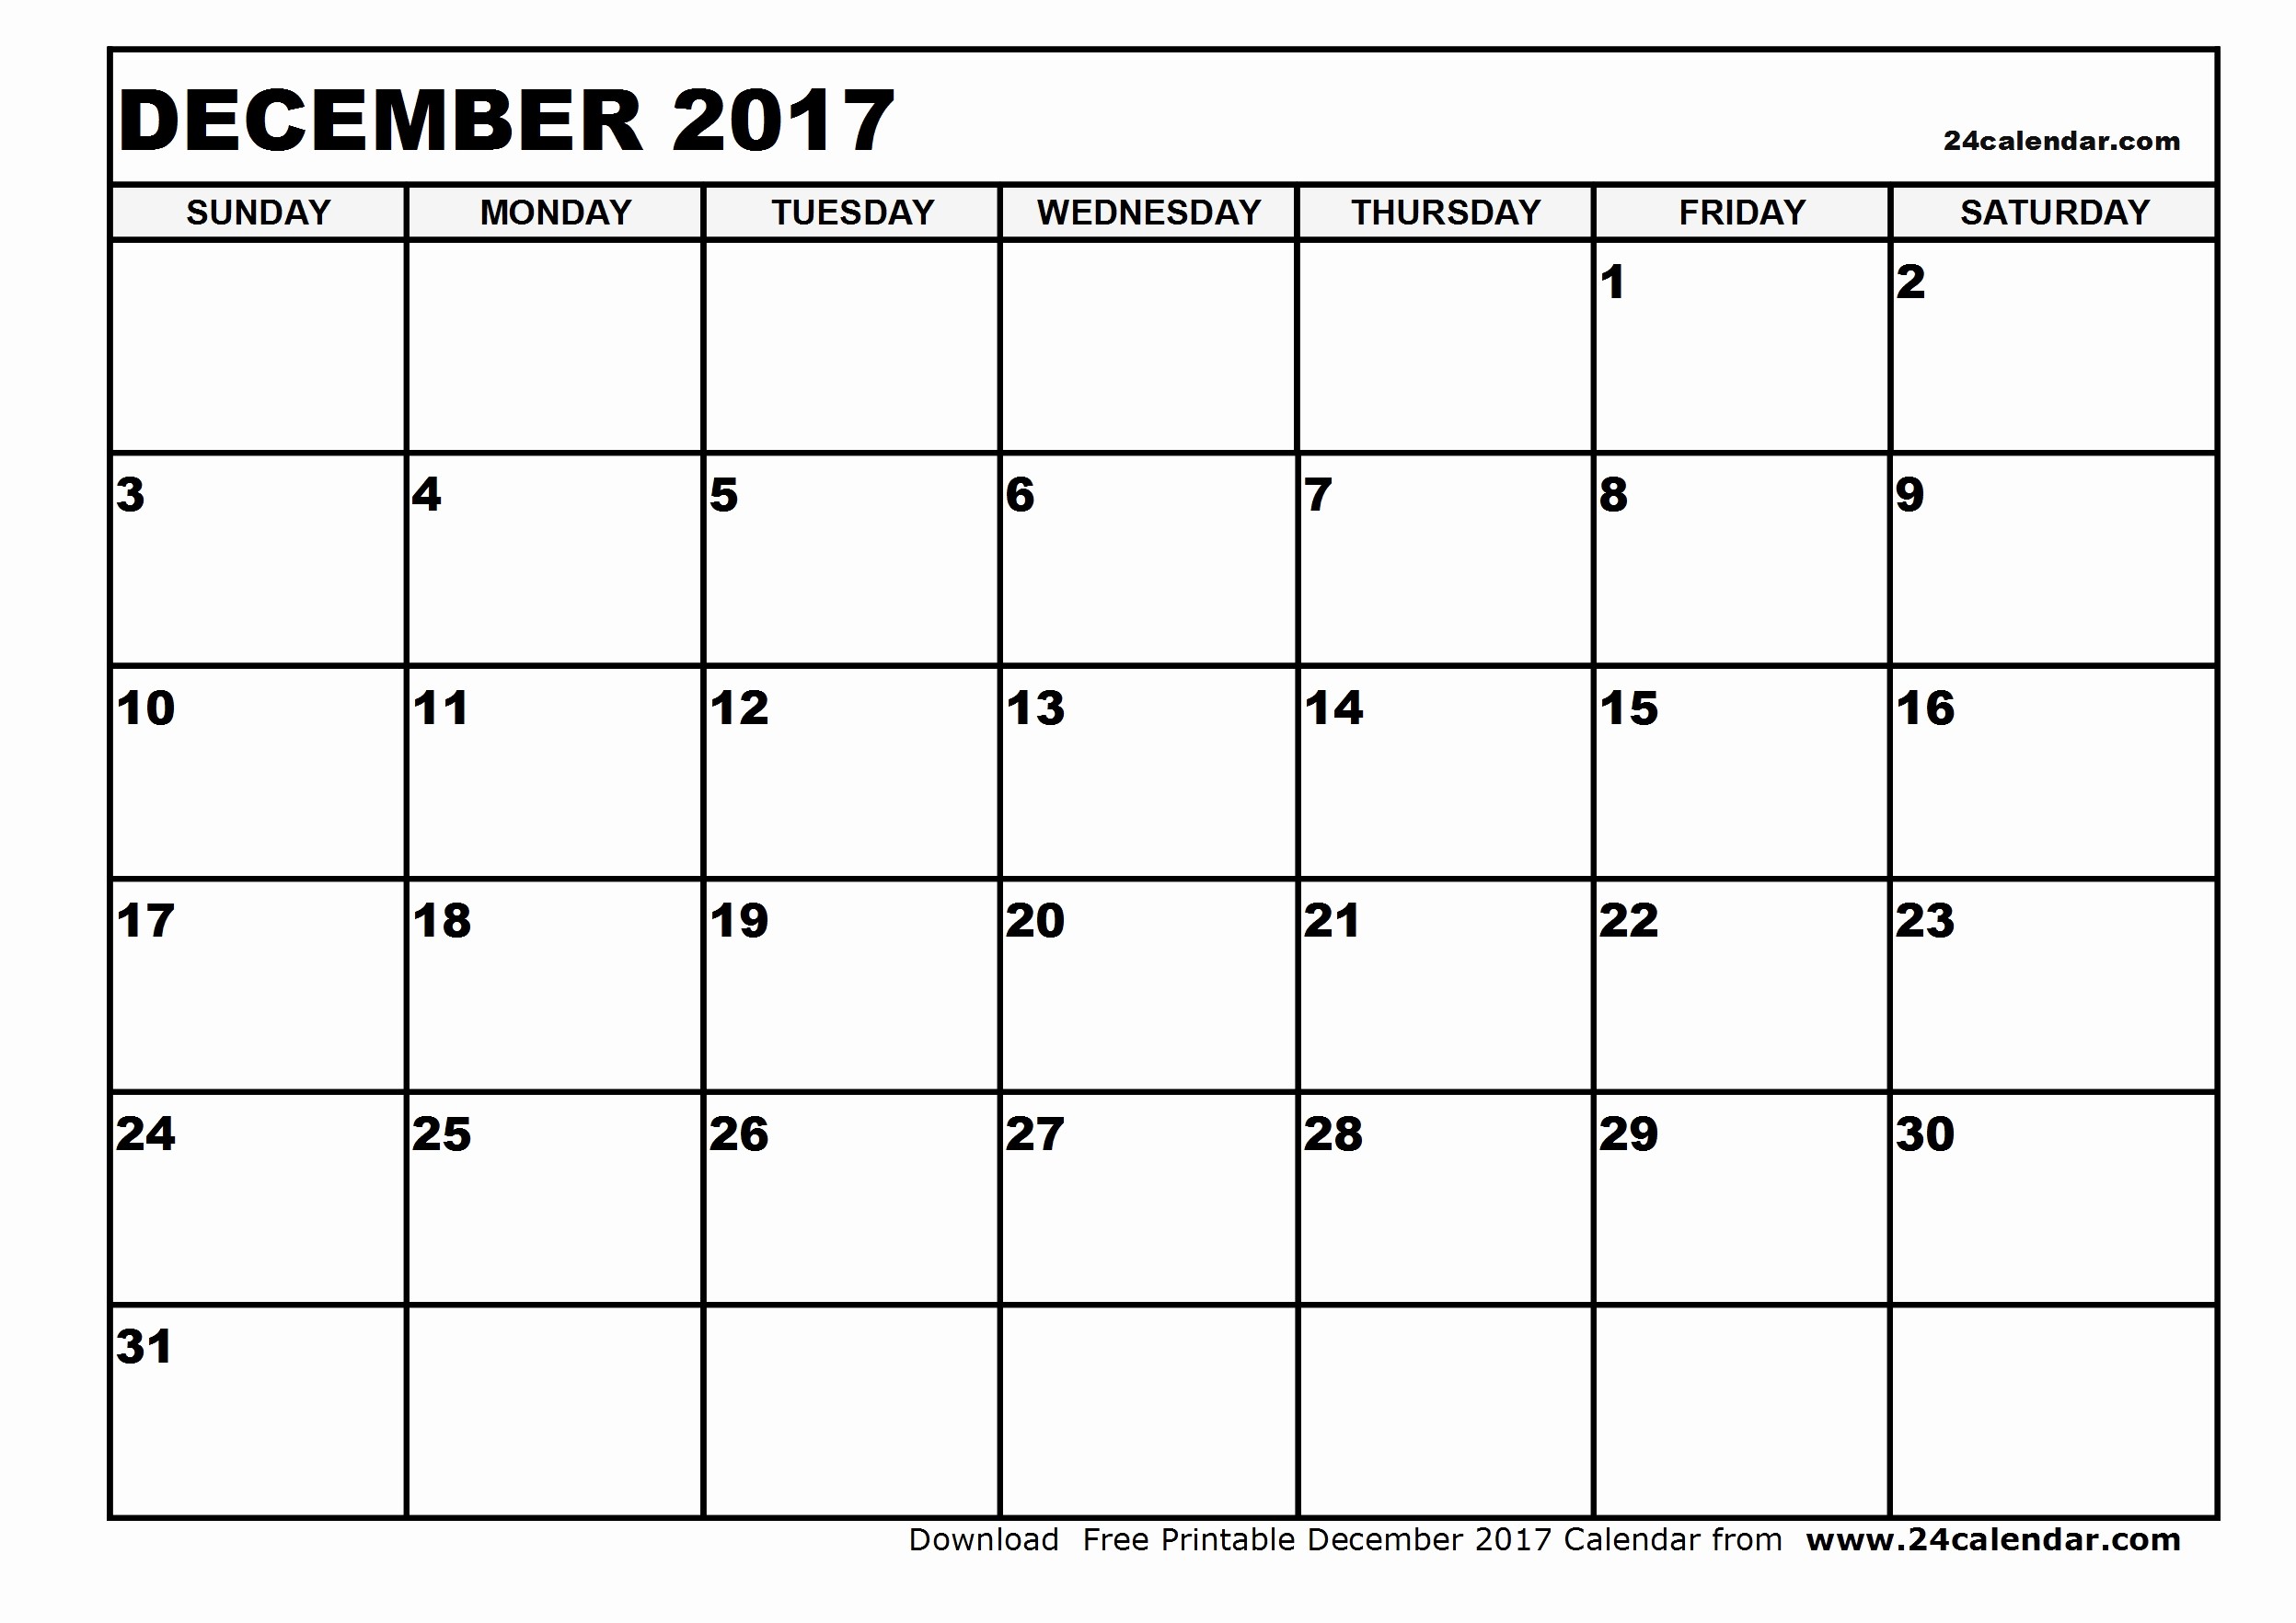 2017 Calendar Template with Notes Awesome December 2017 Calendar Printable with Notes